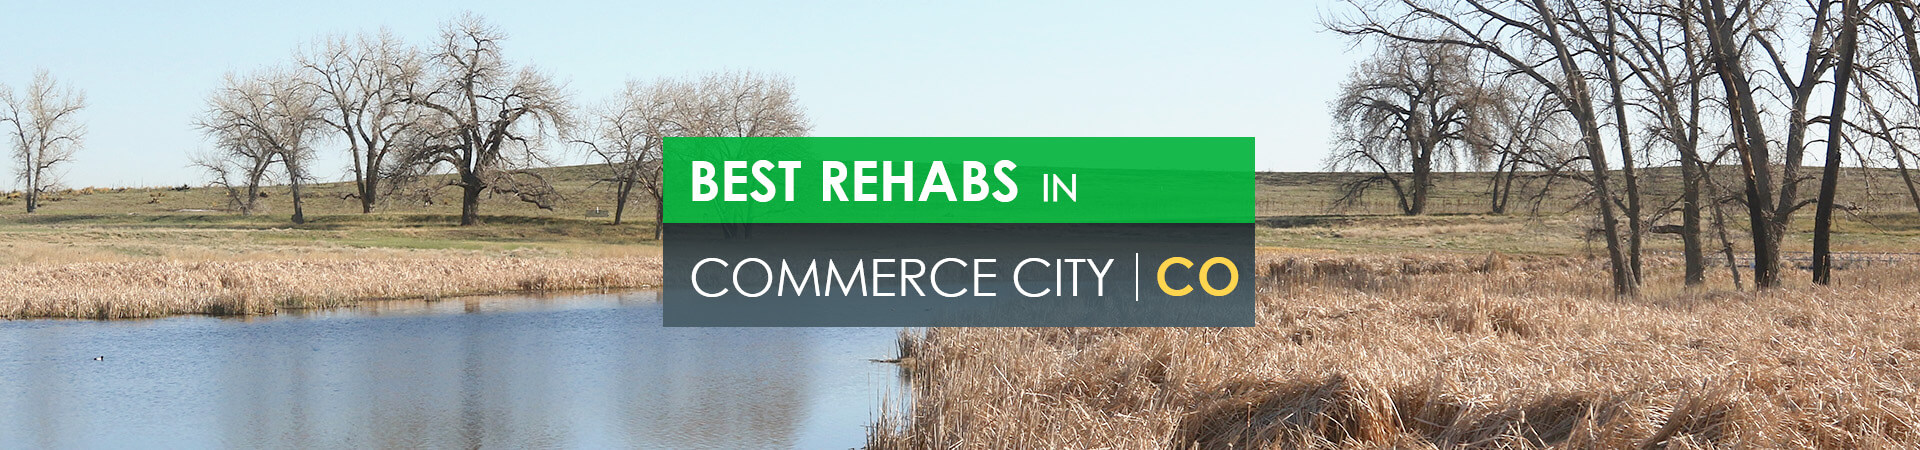 Best rehabs in Commerce City, CO